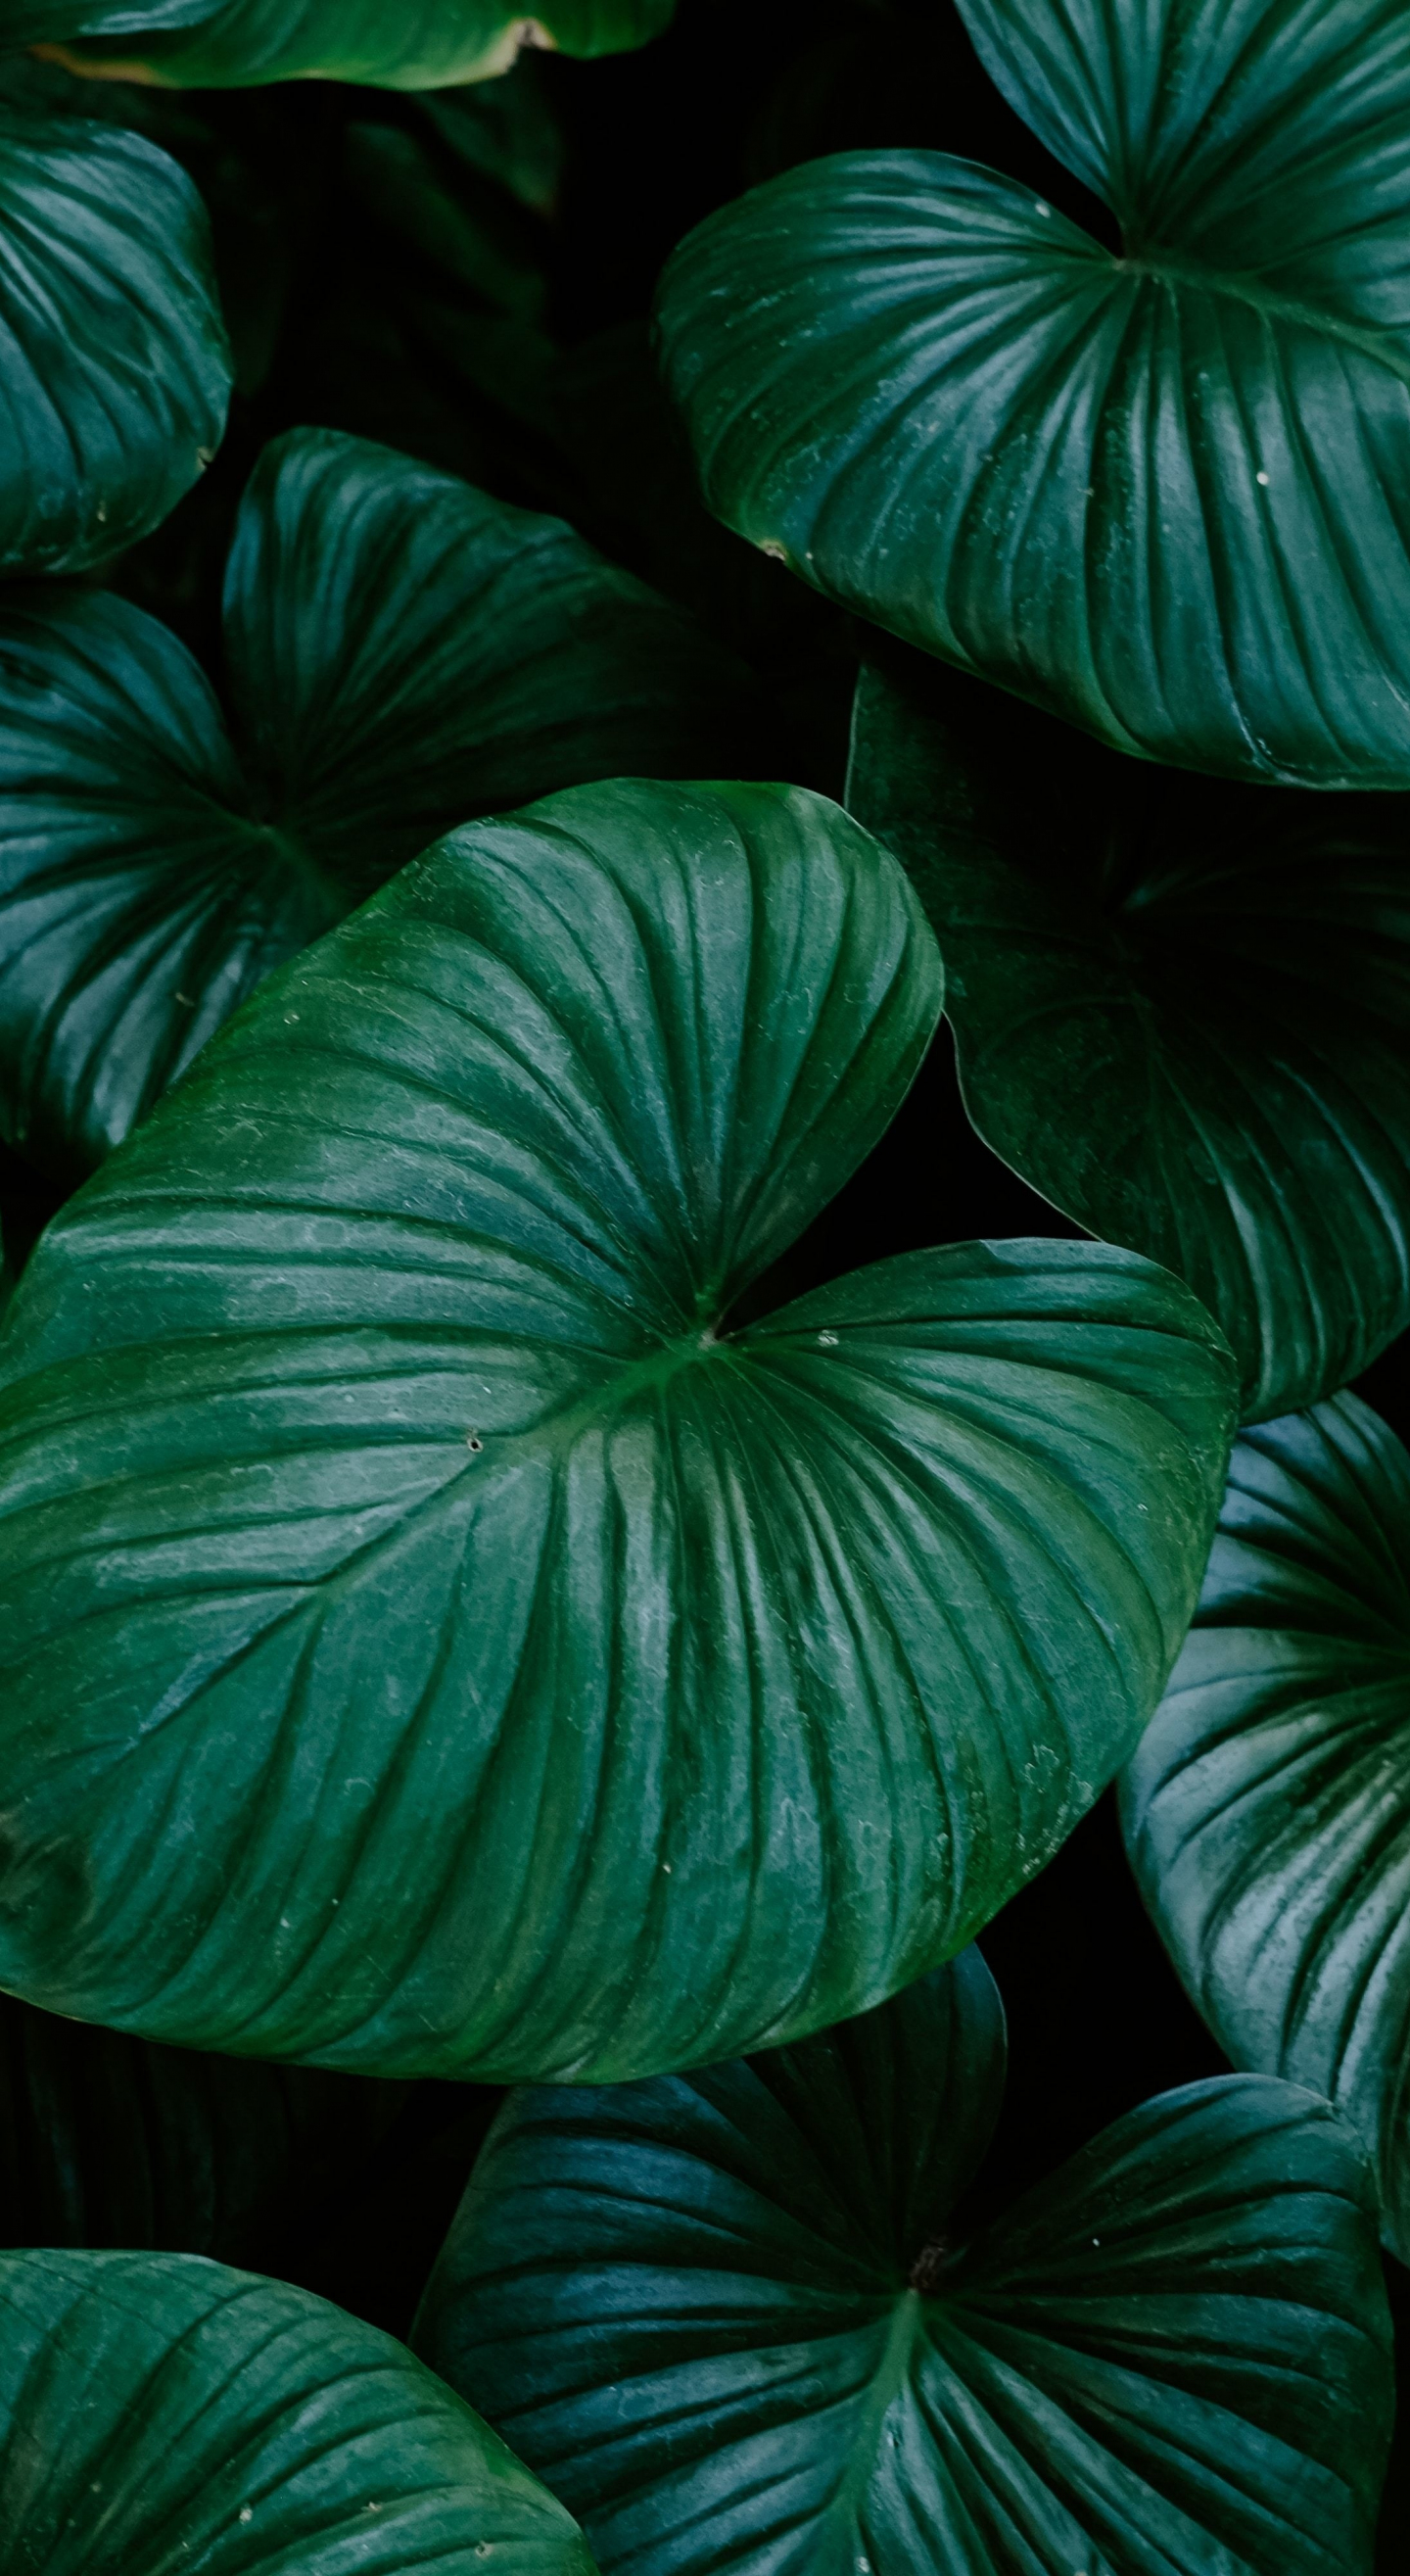 A dark green leafy plant with large green leaves. - Bright